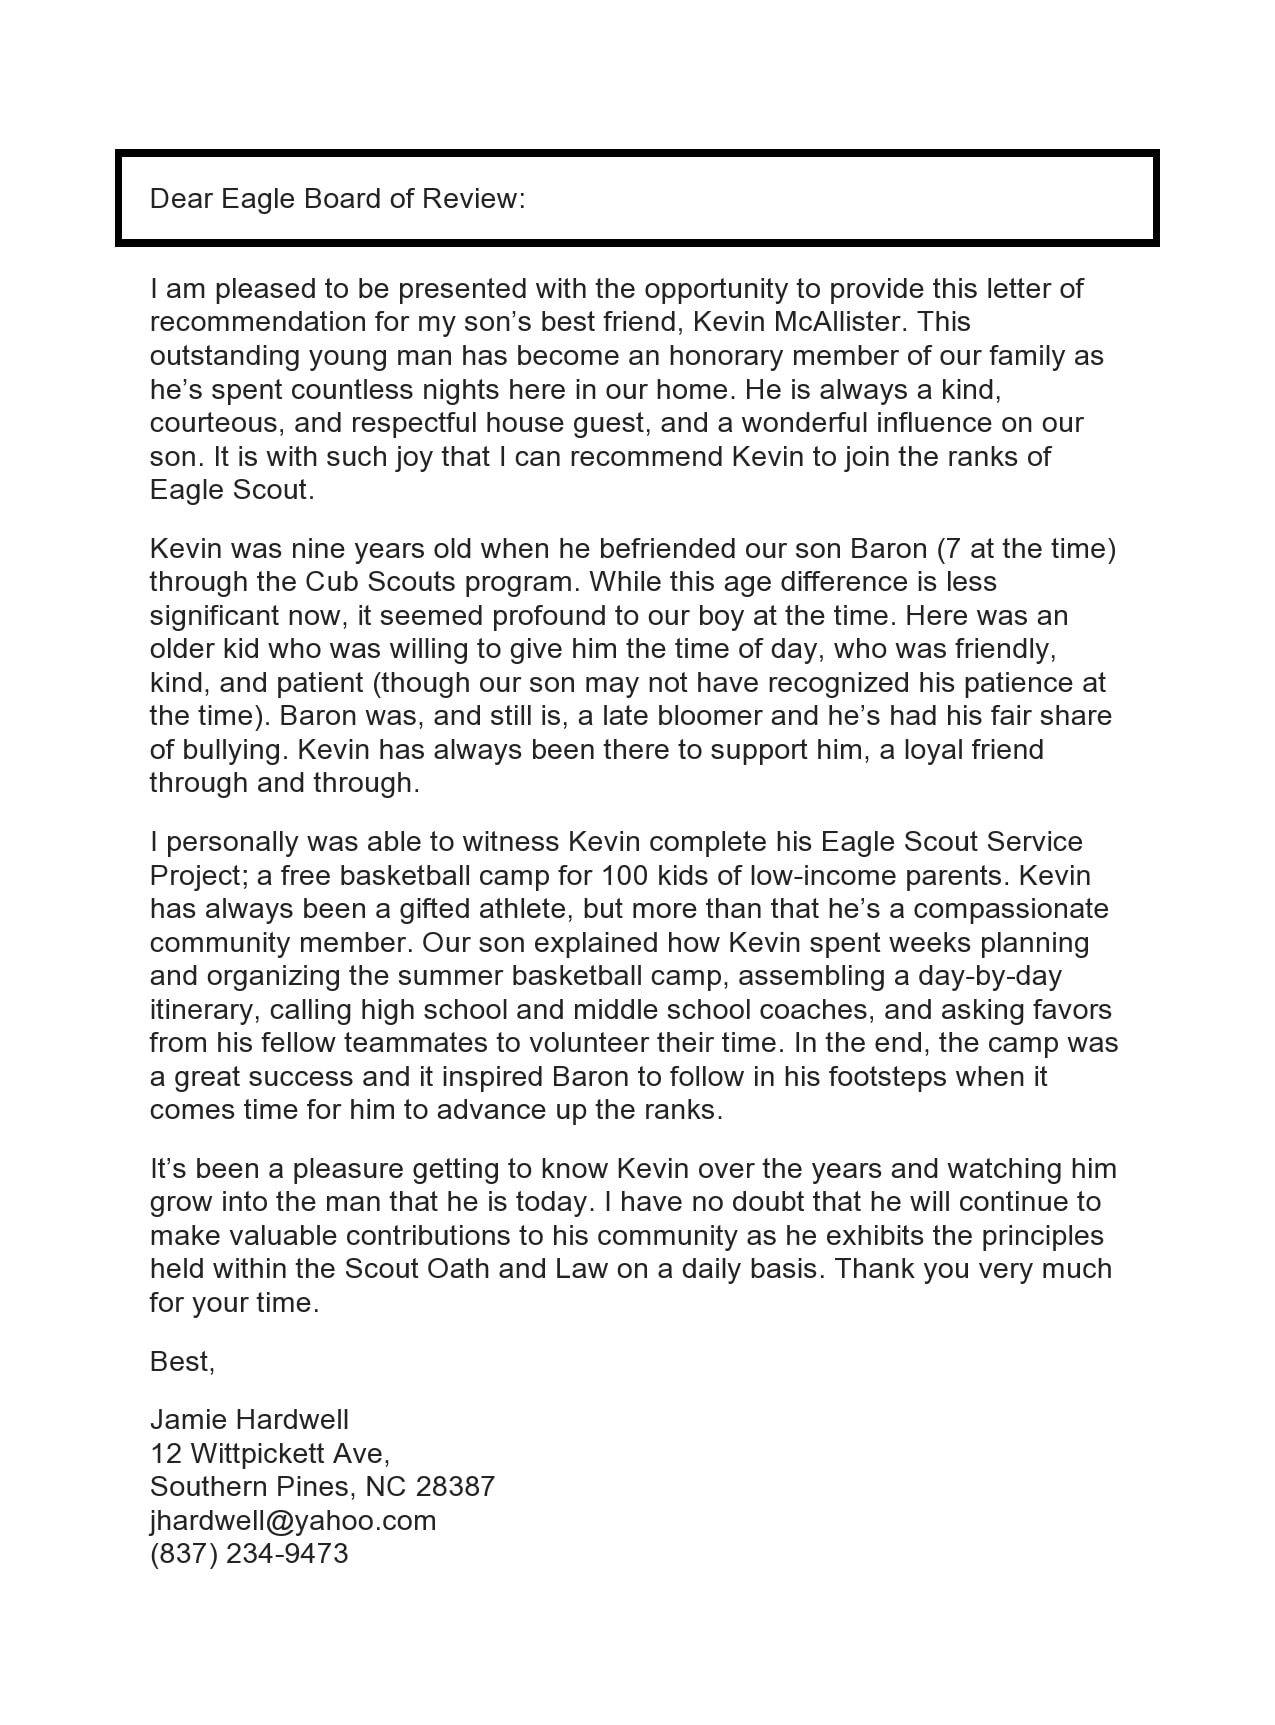 download-33-eagle-scout-letter-of-recommendation-sample-from-employer